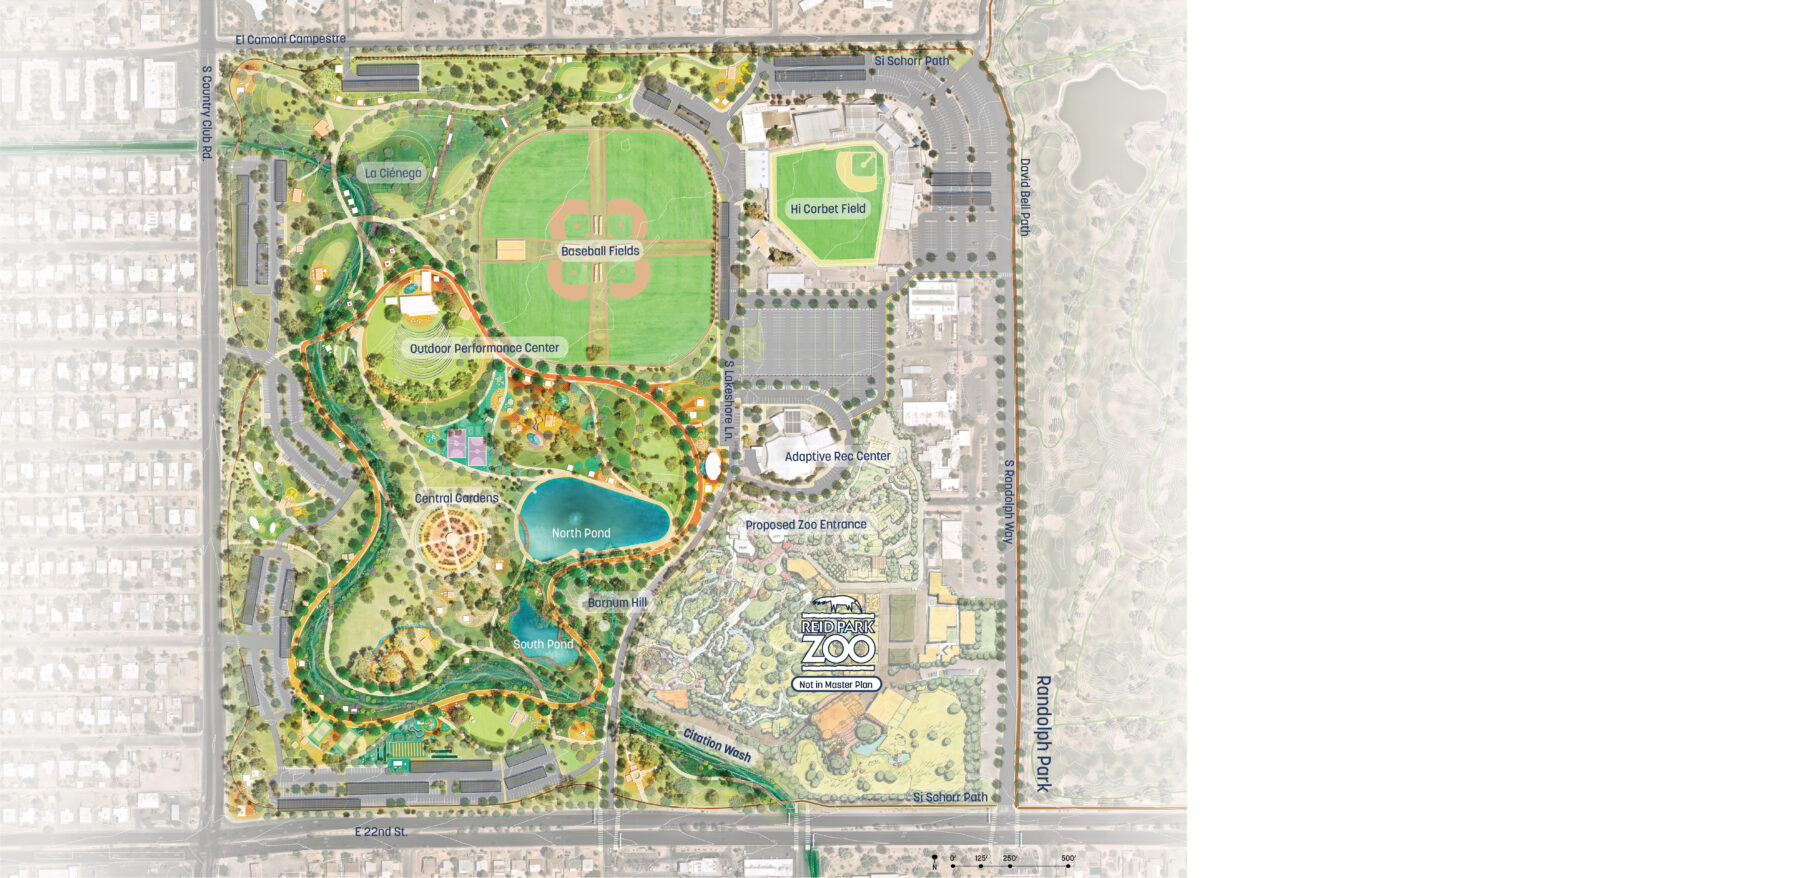 Overall site plan showing the comprehensive vision for the park with labeled areas such as the Zoo, the ponds, the circulation paths, and the recreation areas